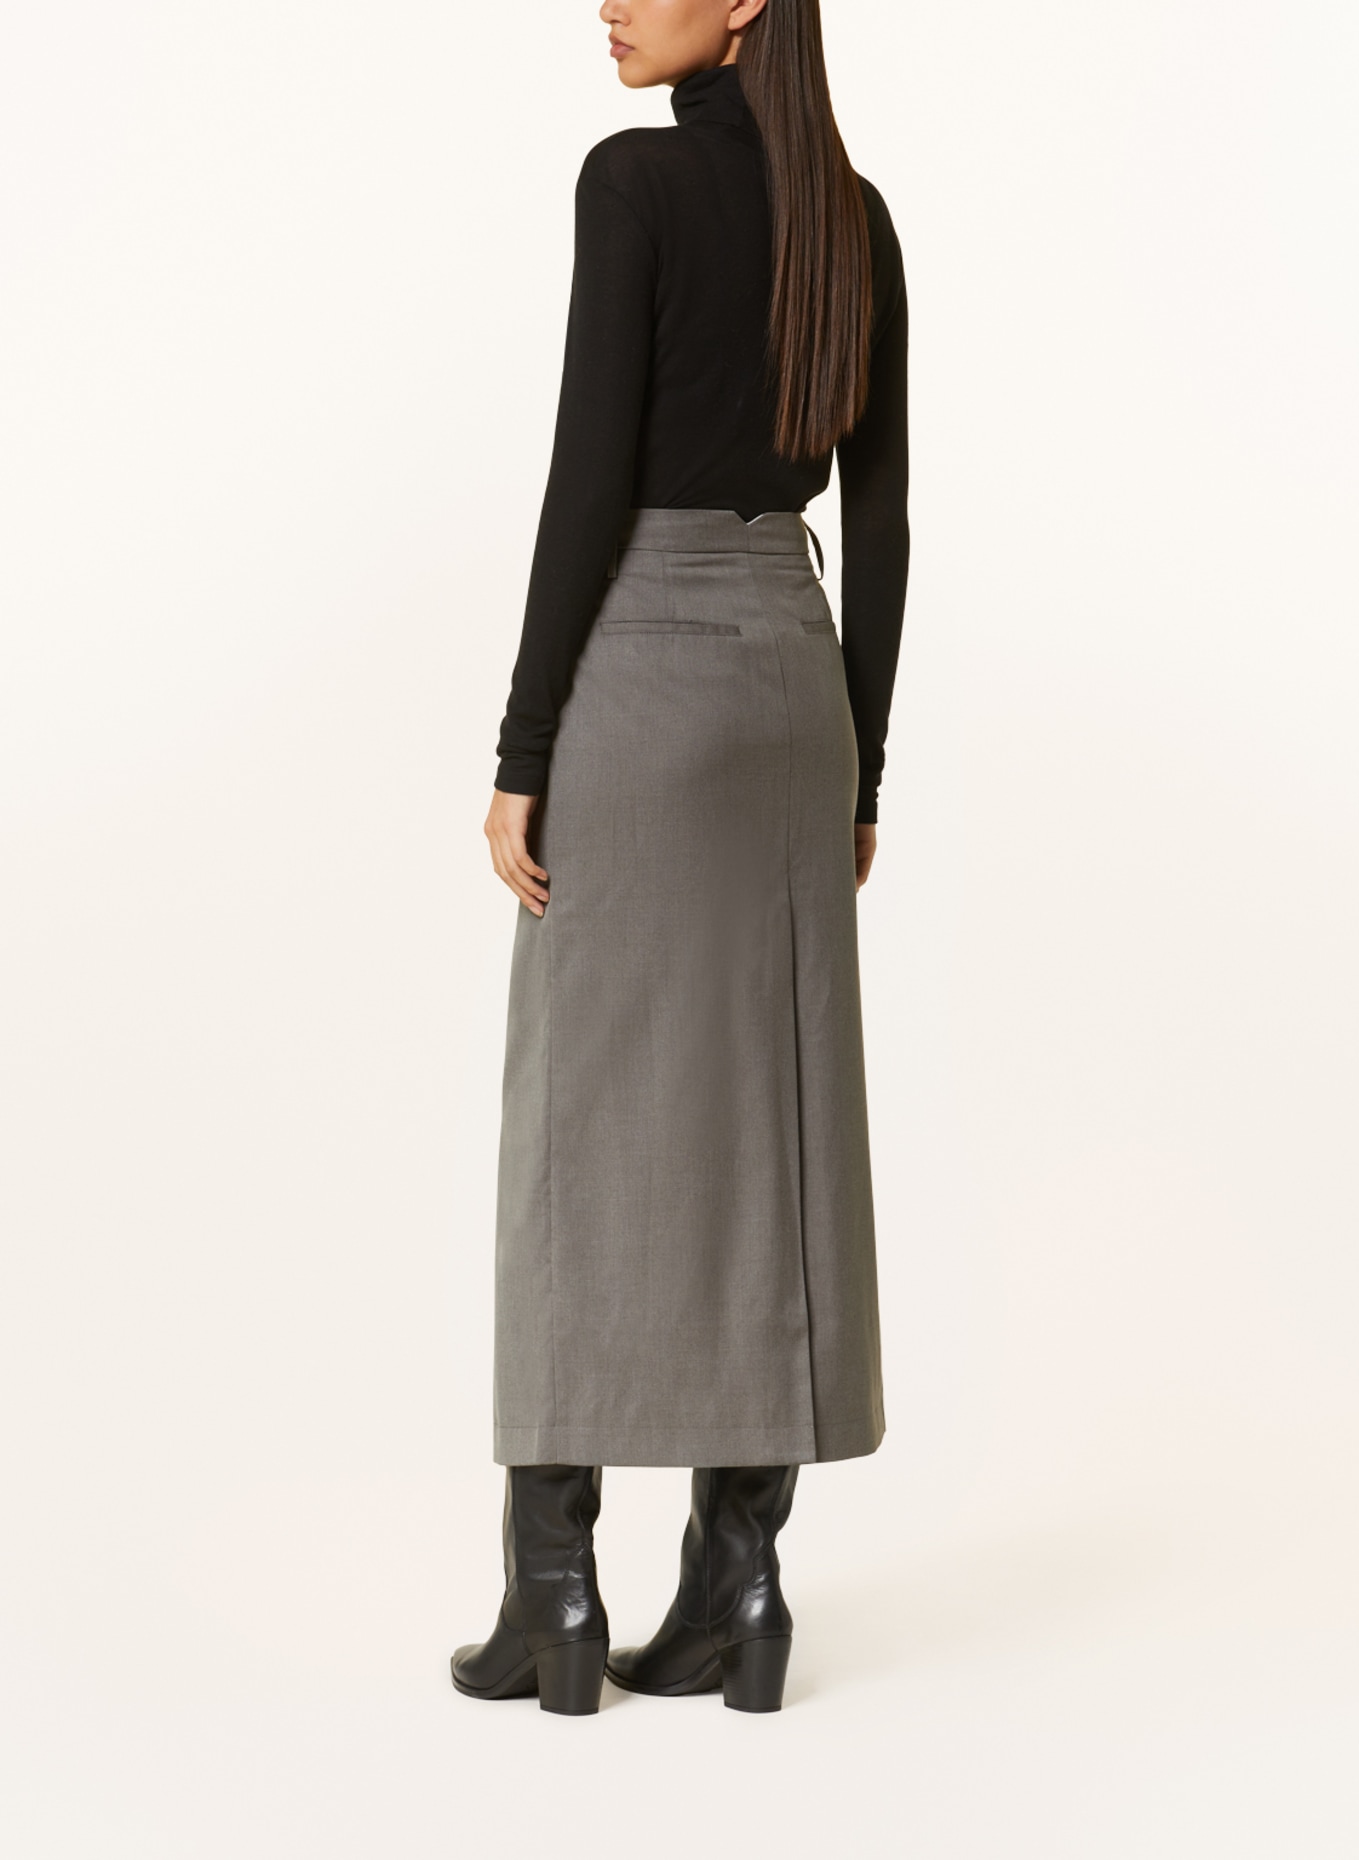 REMAIN Skirt, Color: GRAY (Image 3)